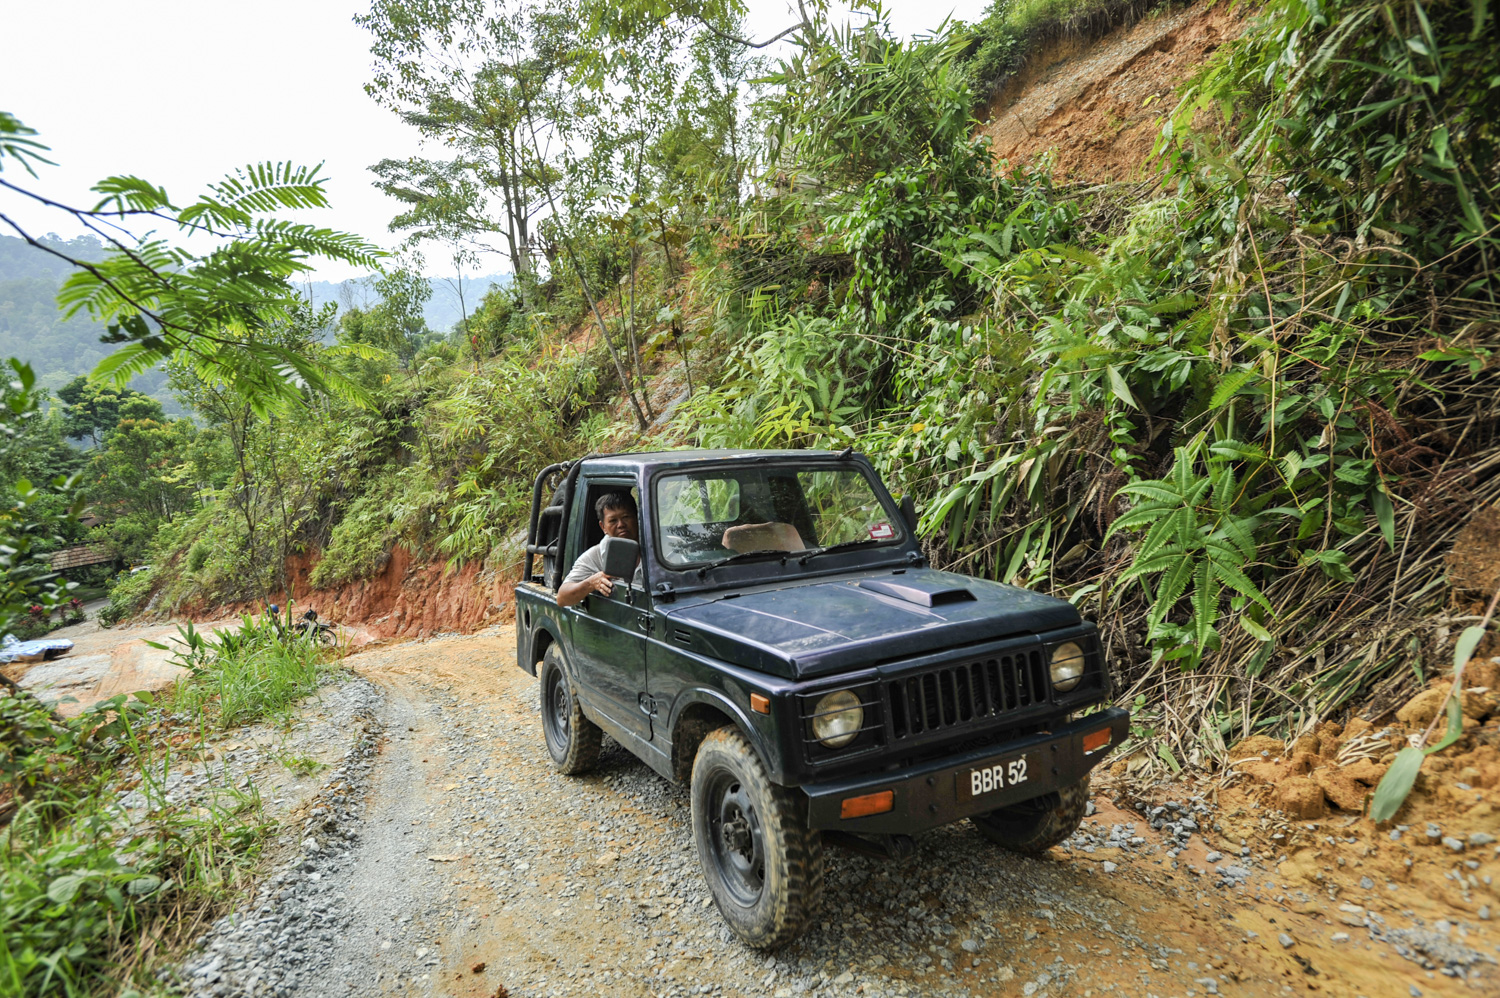 Tin, the experienced builder for Spyder Hill driving his Suzuki 4wd up the driveway.